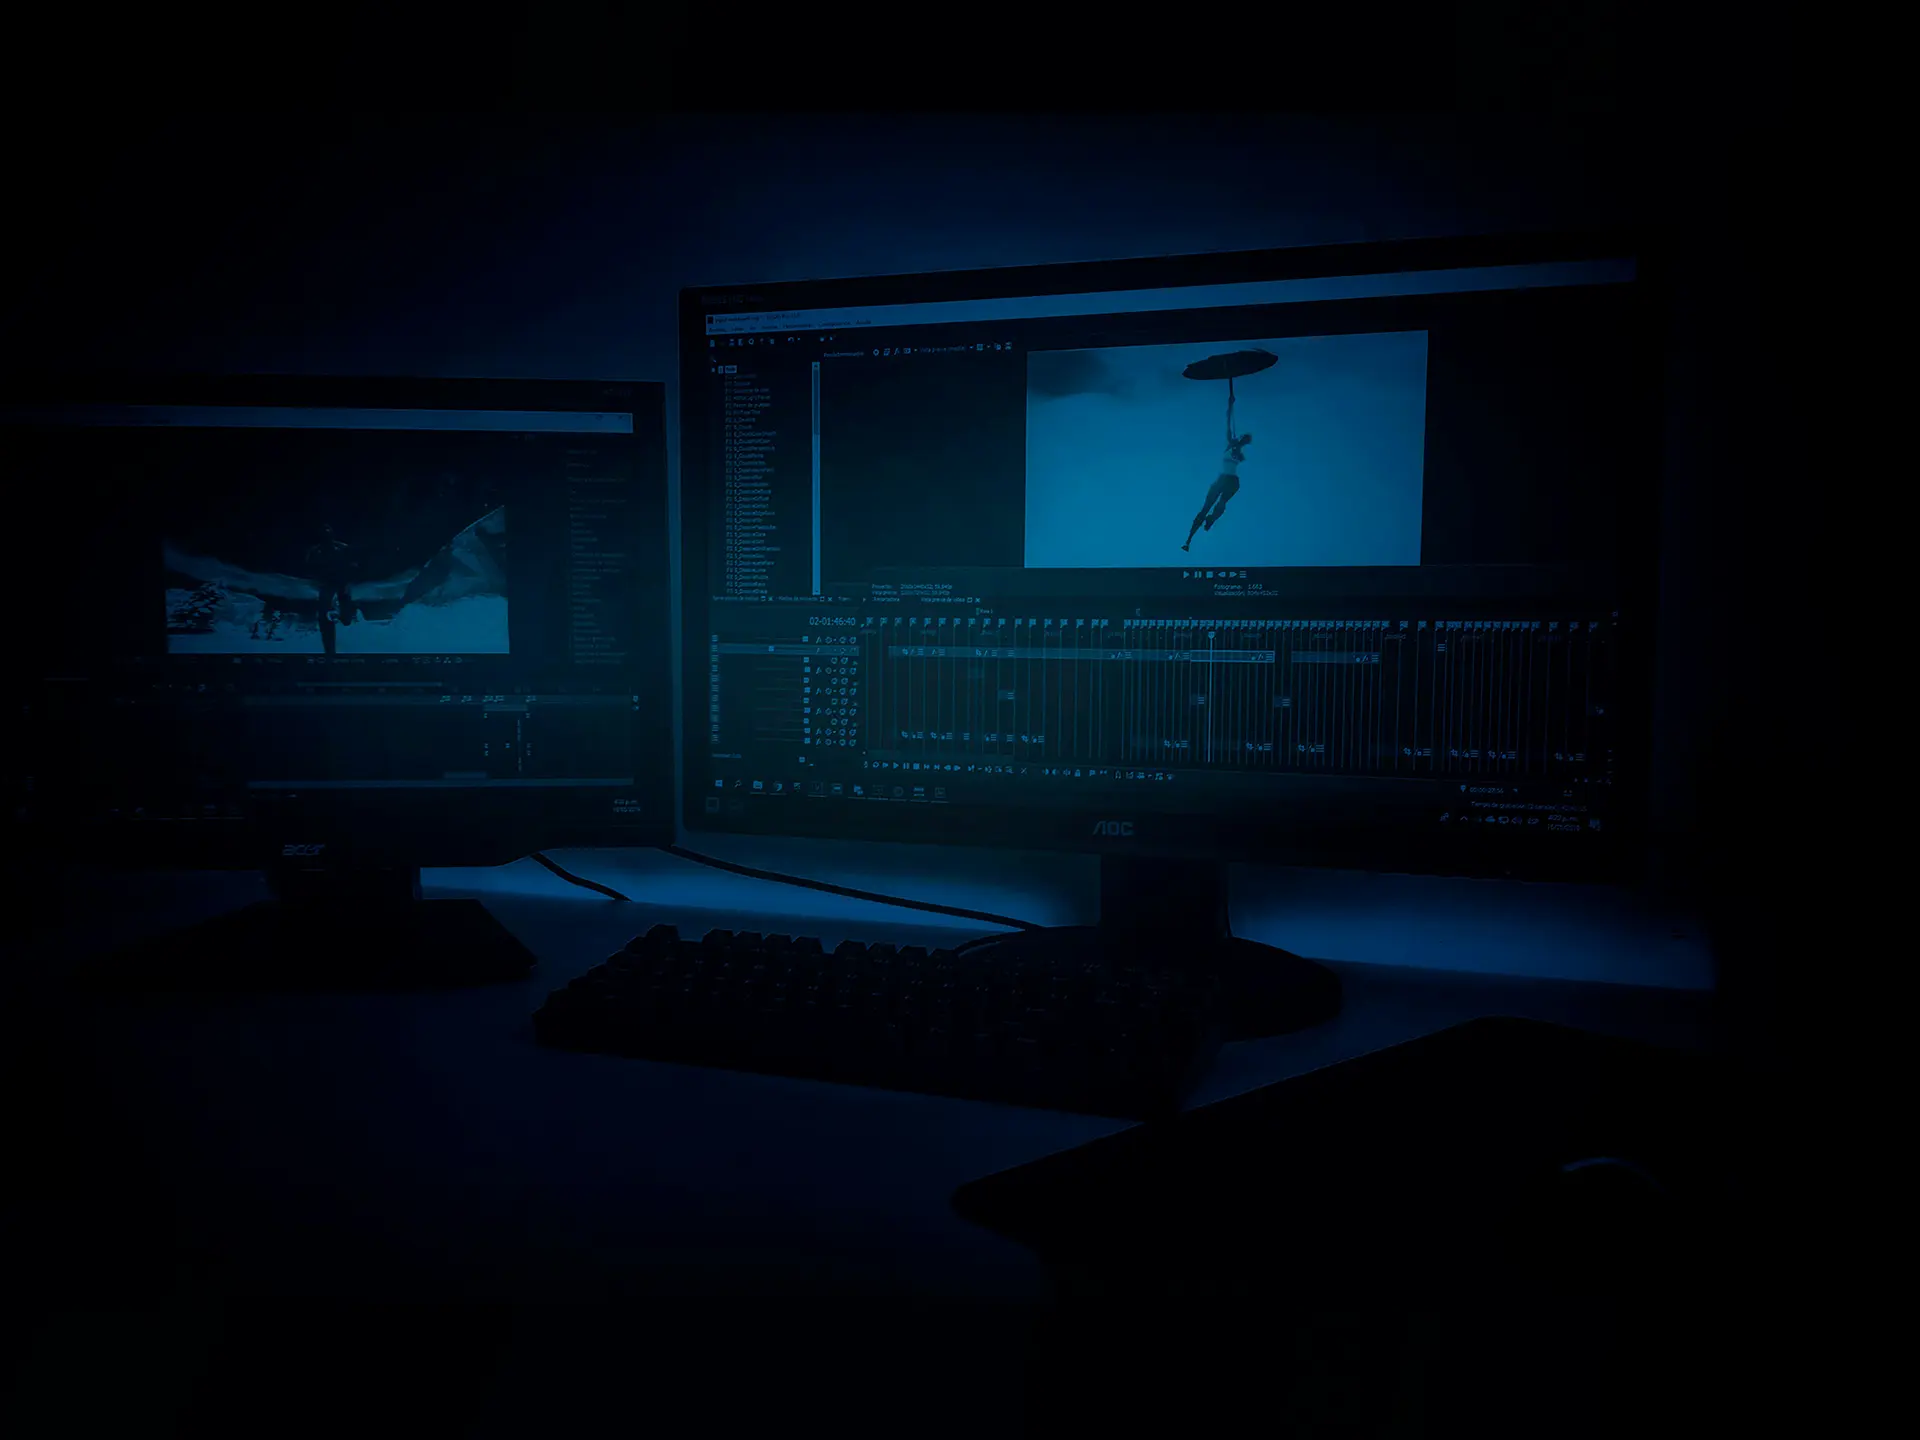 Dark blue image of a computer screen showing video editing software